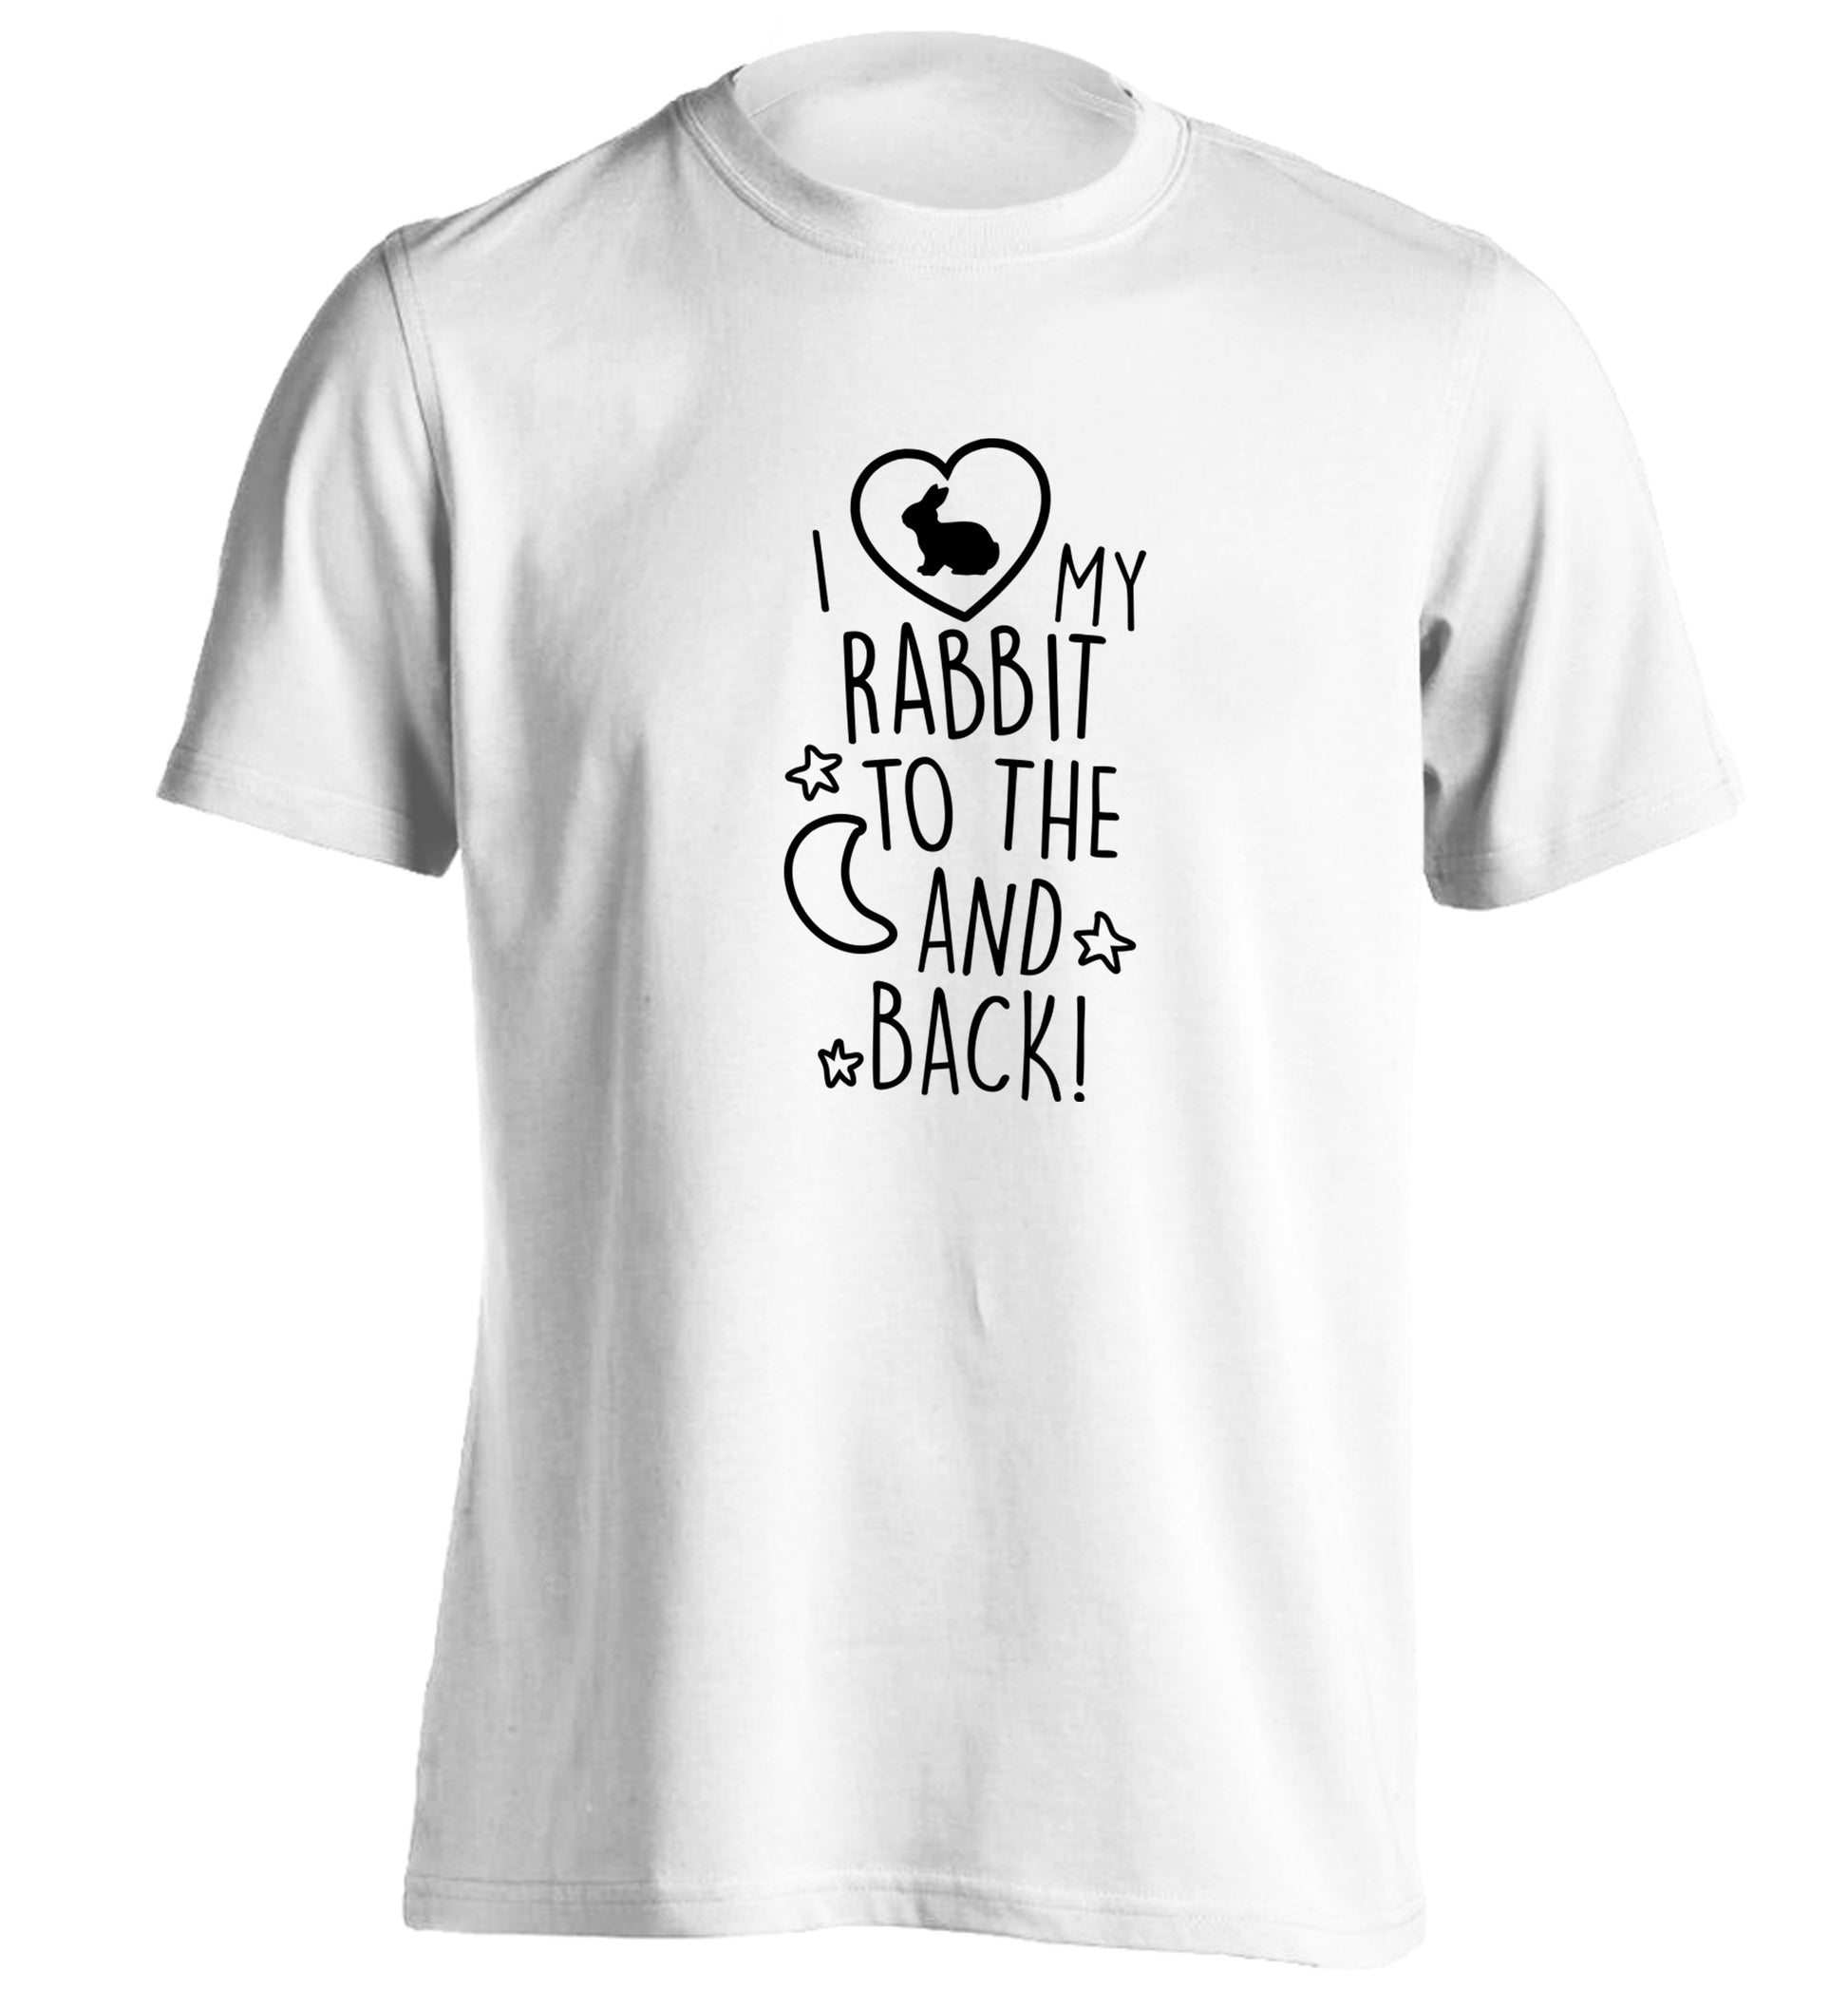 I love my rabbit to the moon and back adults unisex white Tshirt 2XL